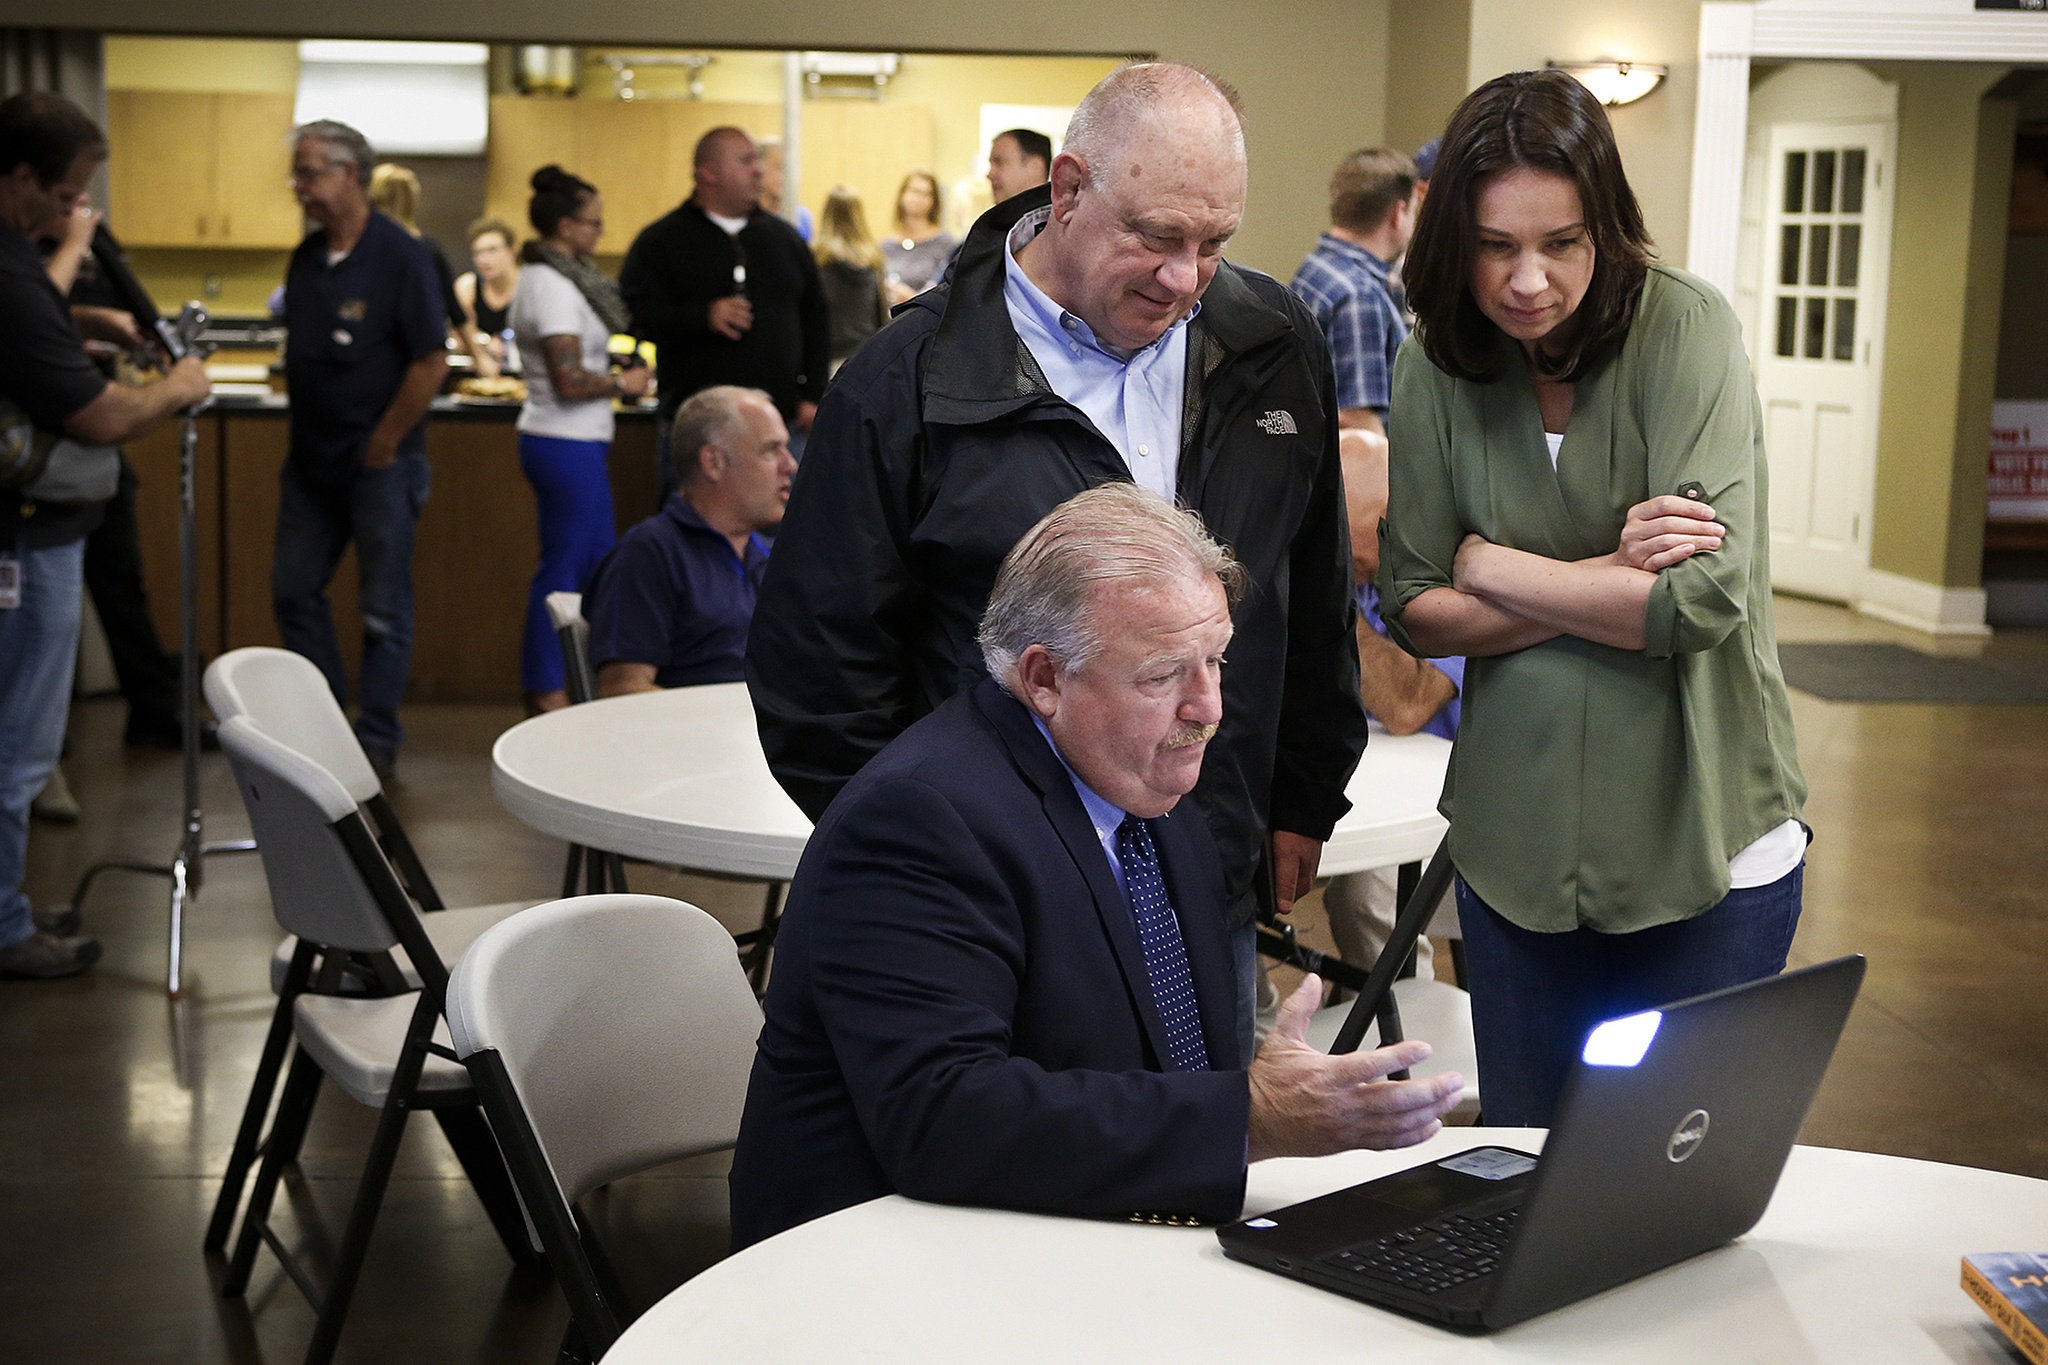 Snohomish County Sheriff Ty Trenary looks at initial voting results for Proposition 1 with Snohomish County Councilman Brian Sullivan and campaign manager Brooke Davis (right) at a gathering for supporters of the proposition at Everett Firefighters Hall on Tuesday night. (Ian Terry / The Herald)